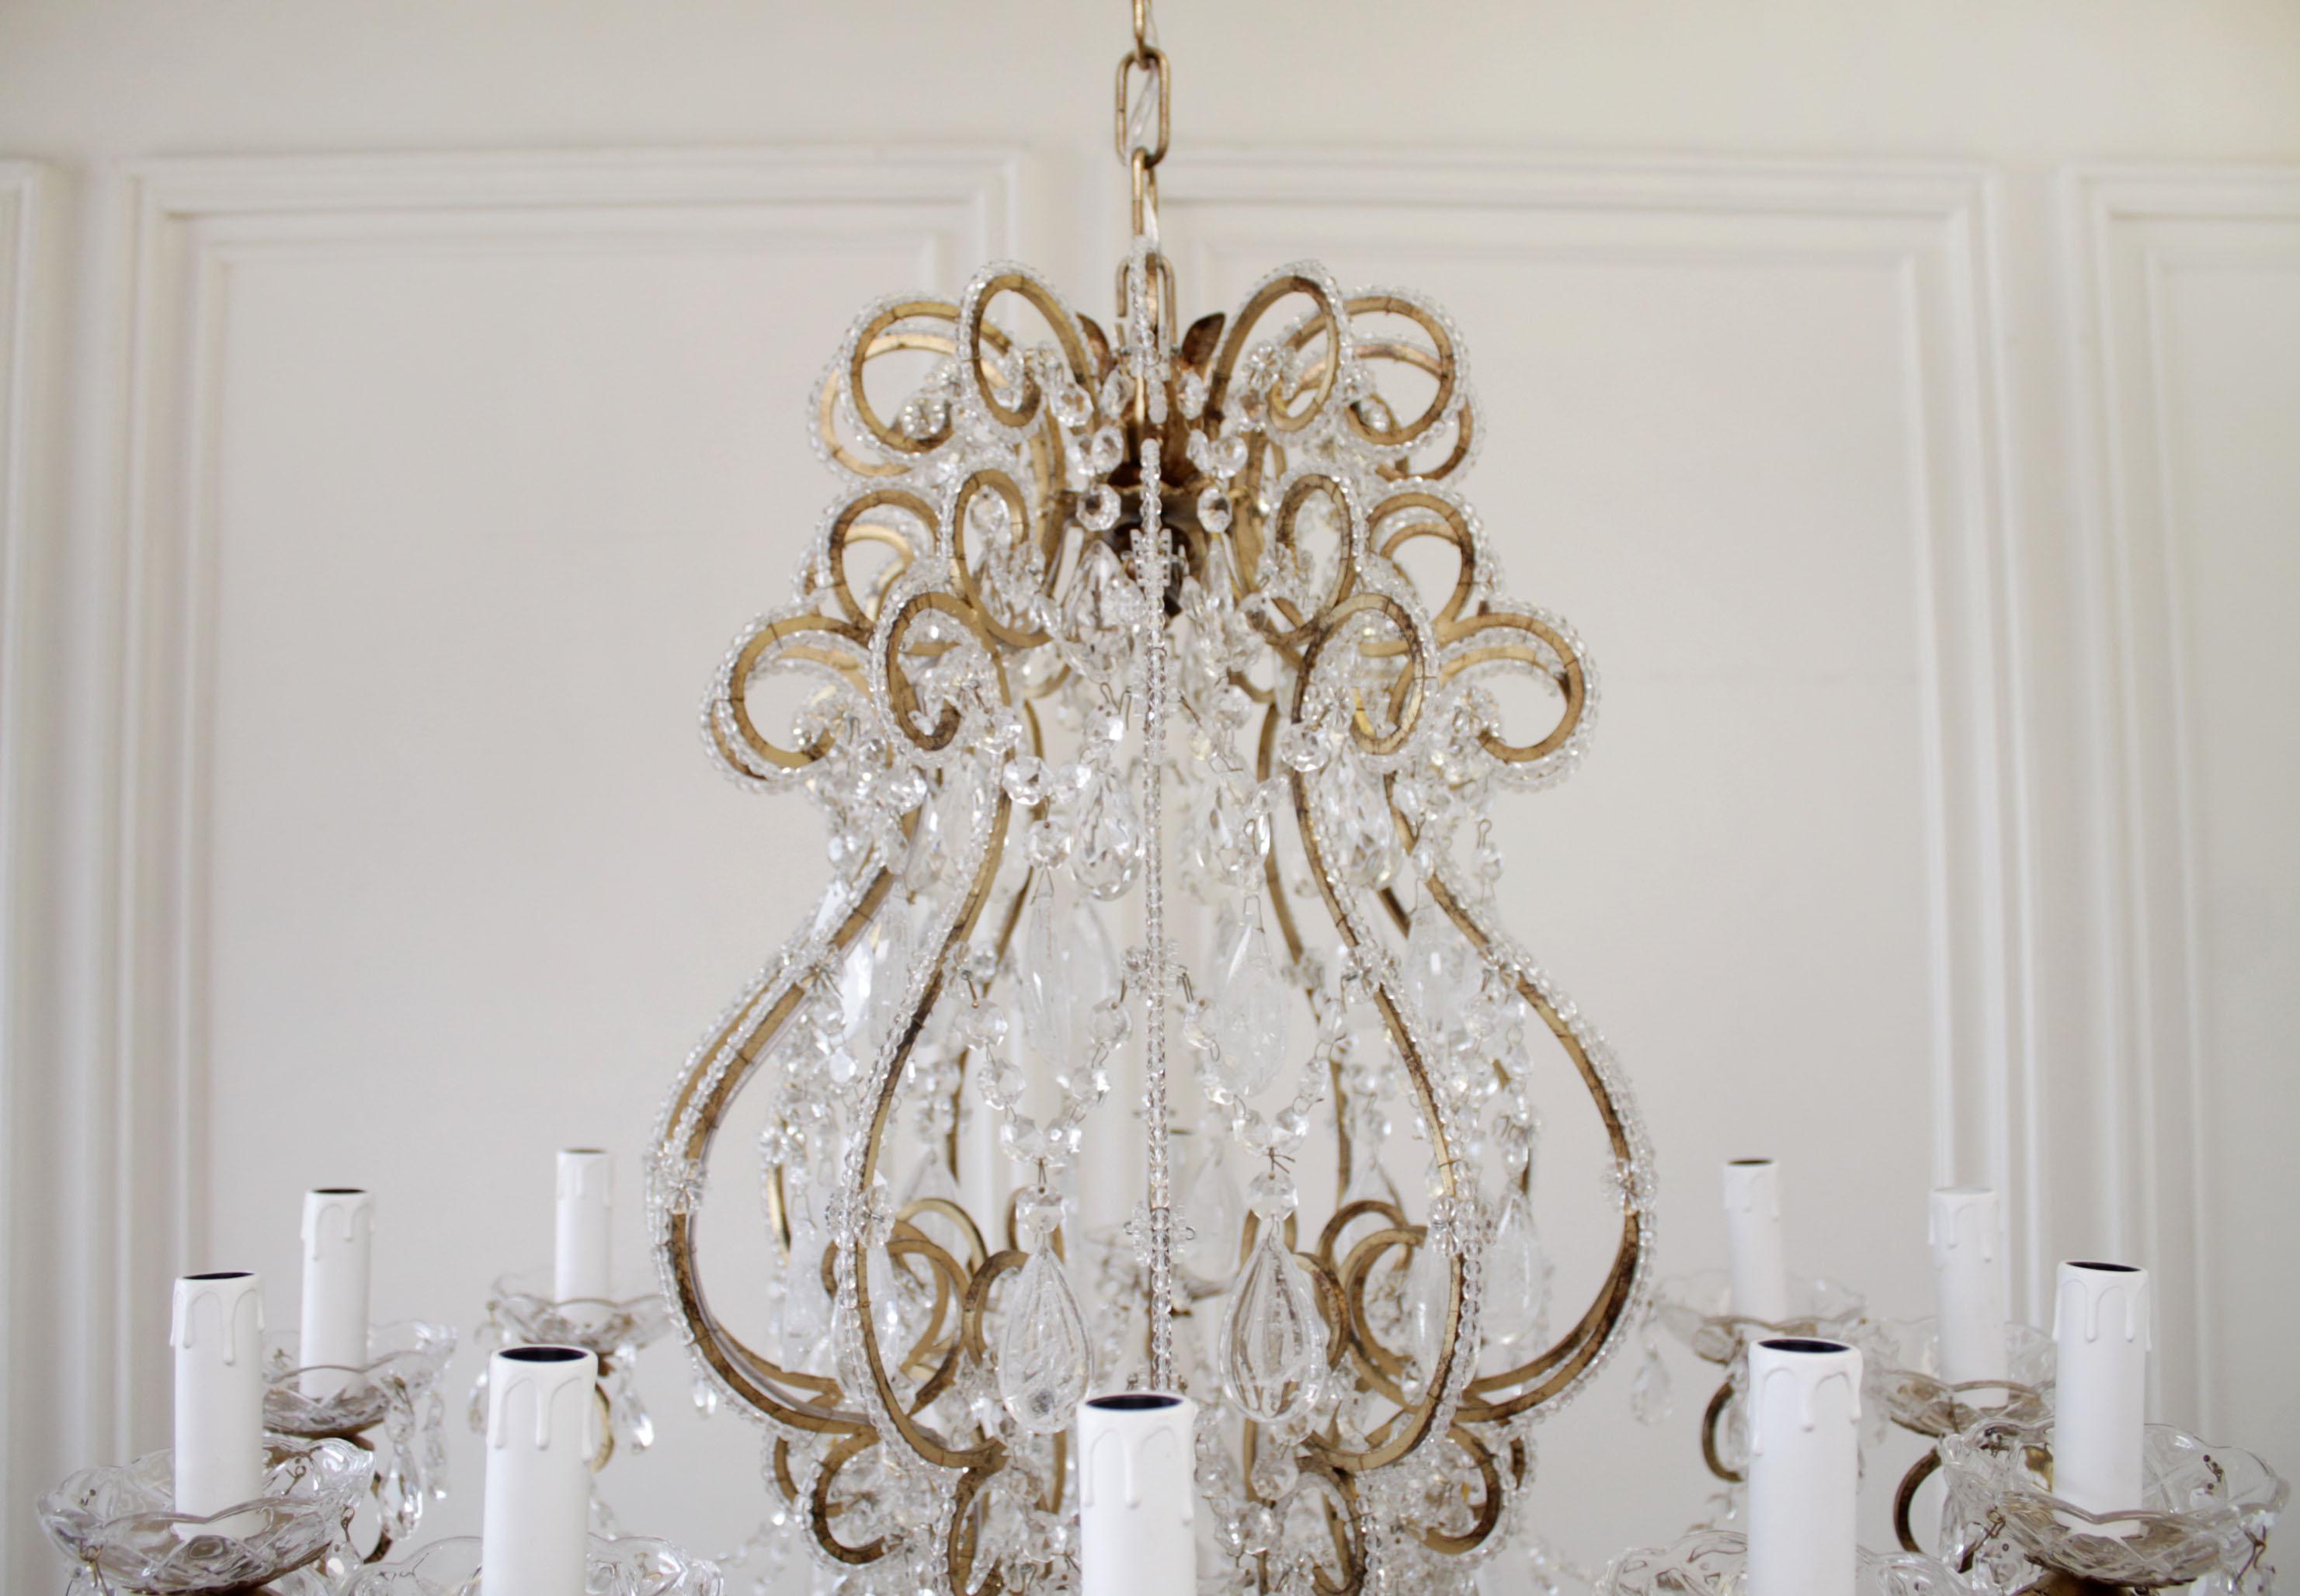 Antique reproduction Italian chandelier with beaded arms and rock style crystals
These are part of our new collection for Full Bloom Cottage. We've recreated a new line of vintage inspired chandeliers, all custom and handmade in Italy with a rock